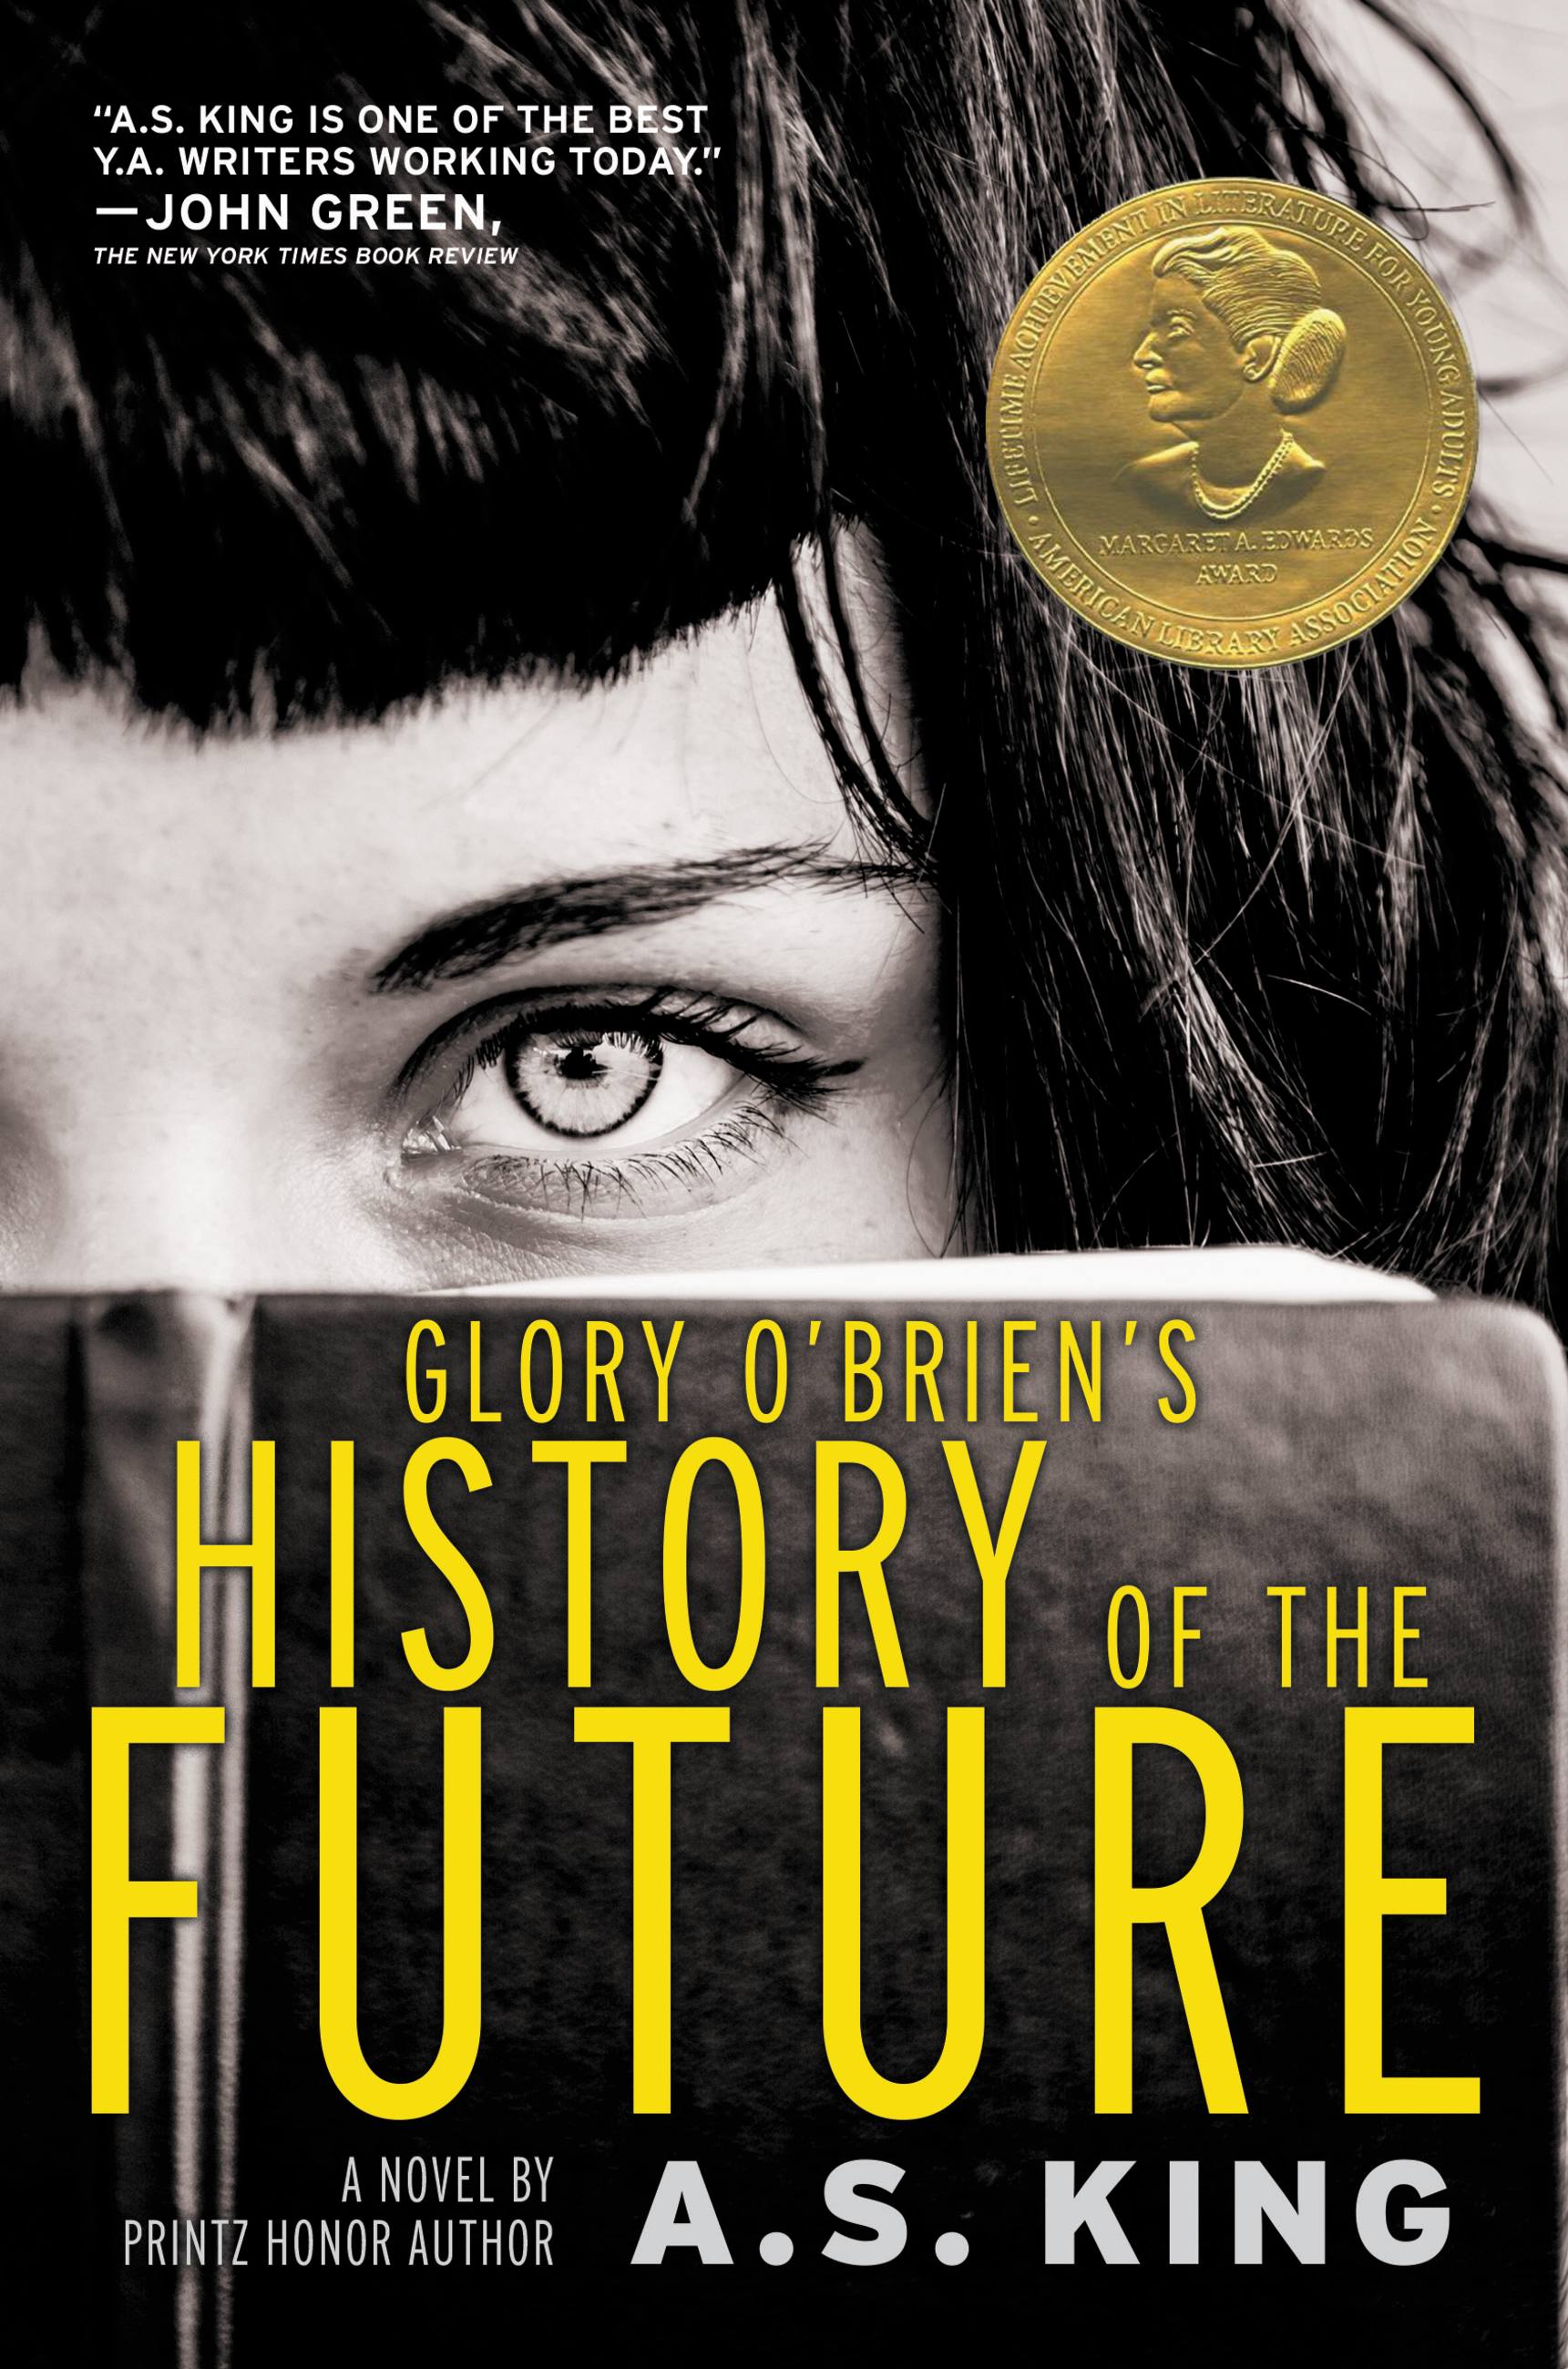 Teen Tiny Breasts - Glory O'Brien's History of the Future by A.S. King | Hachette Book Group